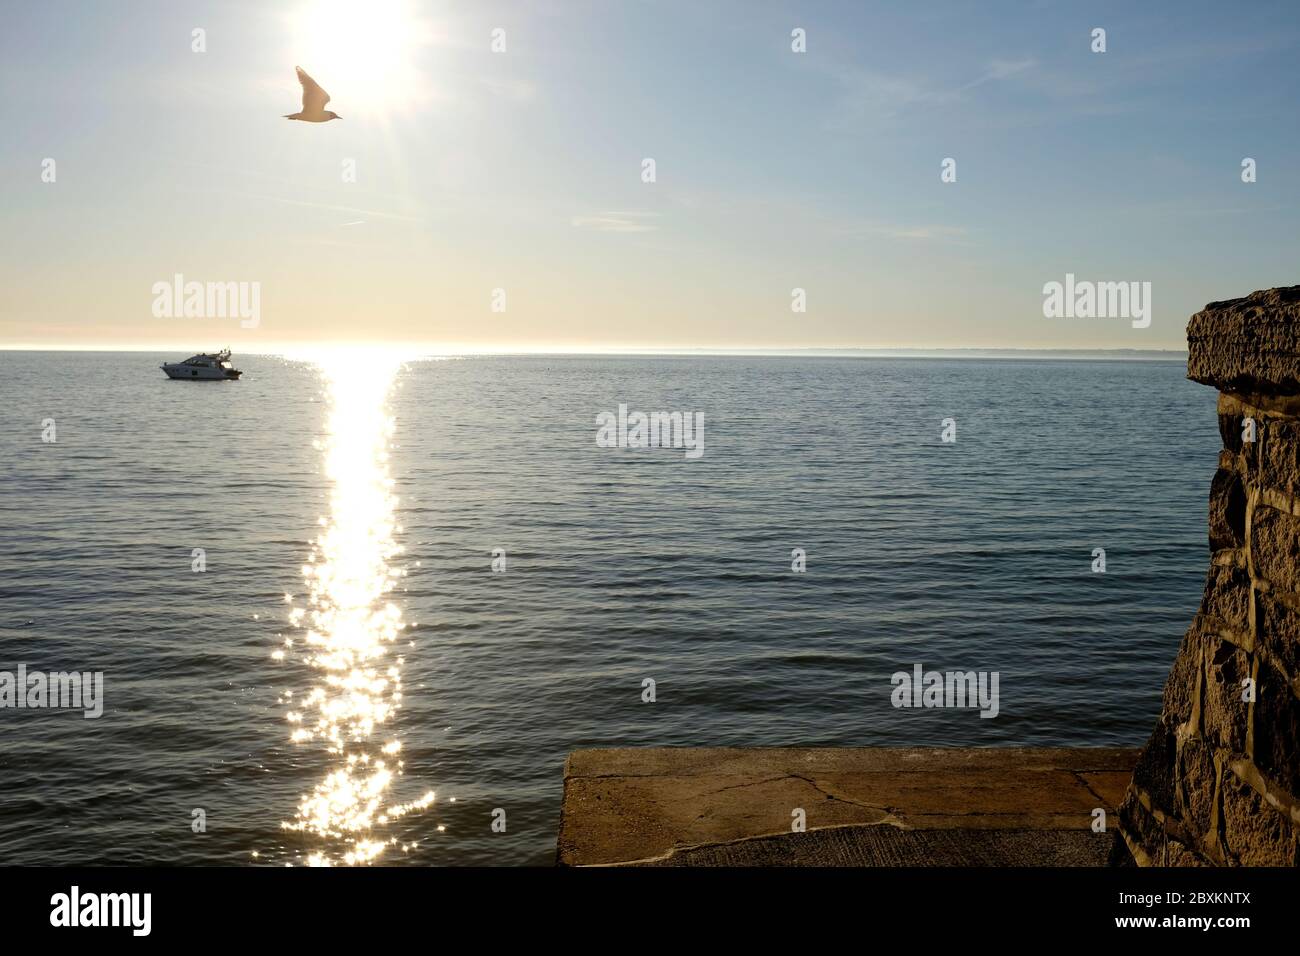 A seagull flys past seafront promenade sea wall as sunset over horizon boat at anchor in Totland Bay Isle of Wight clear sky bright good weather Stock Photo